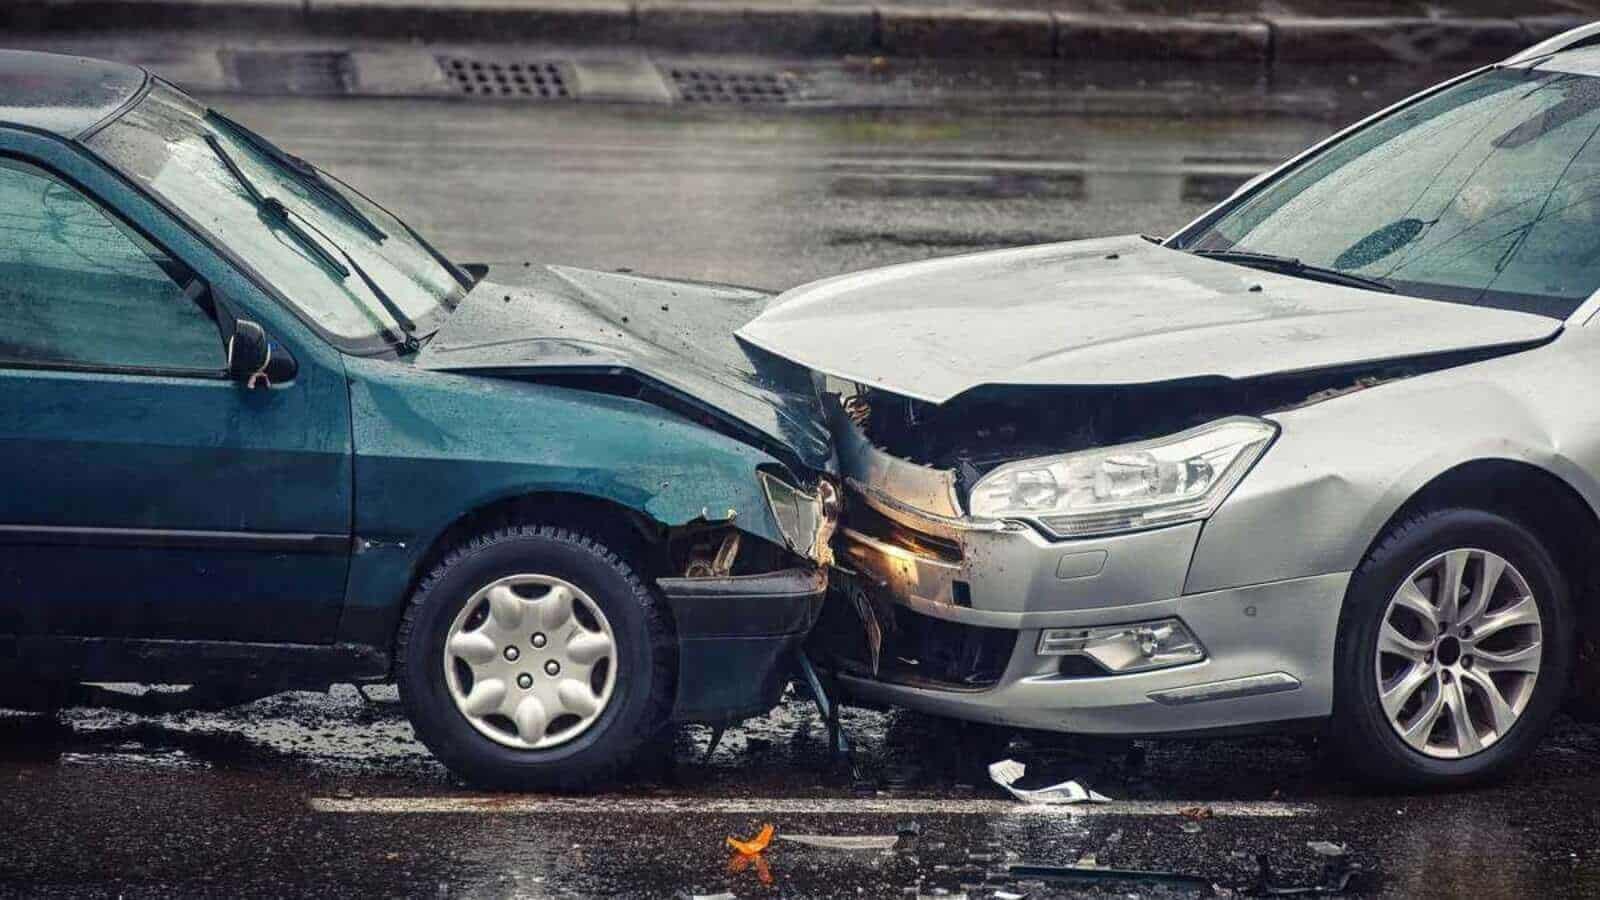 Car accident on wet road during rain, head on collision side view.